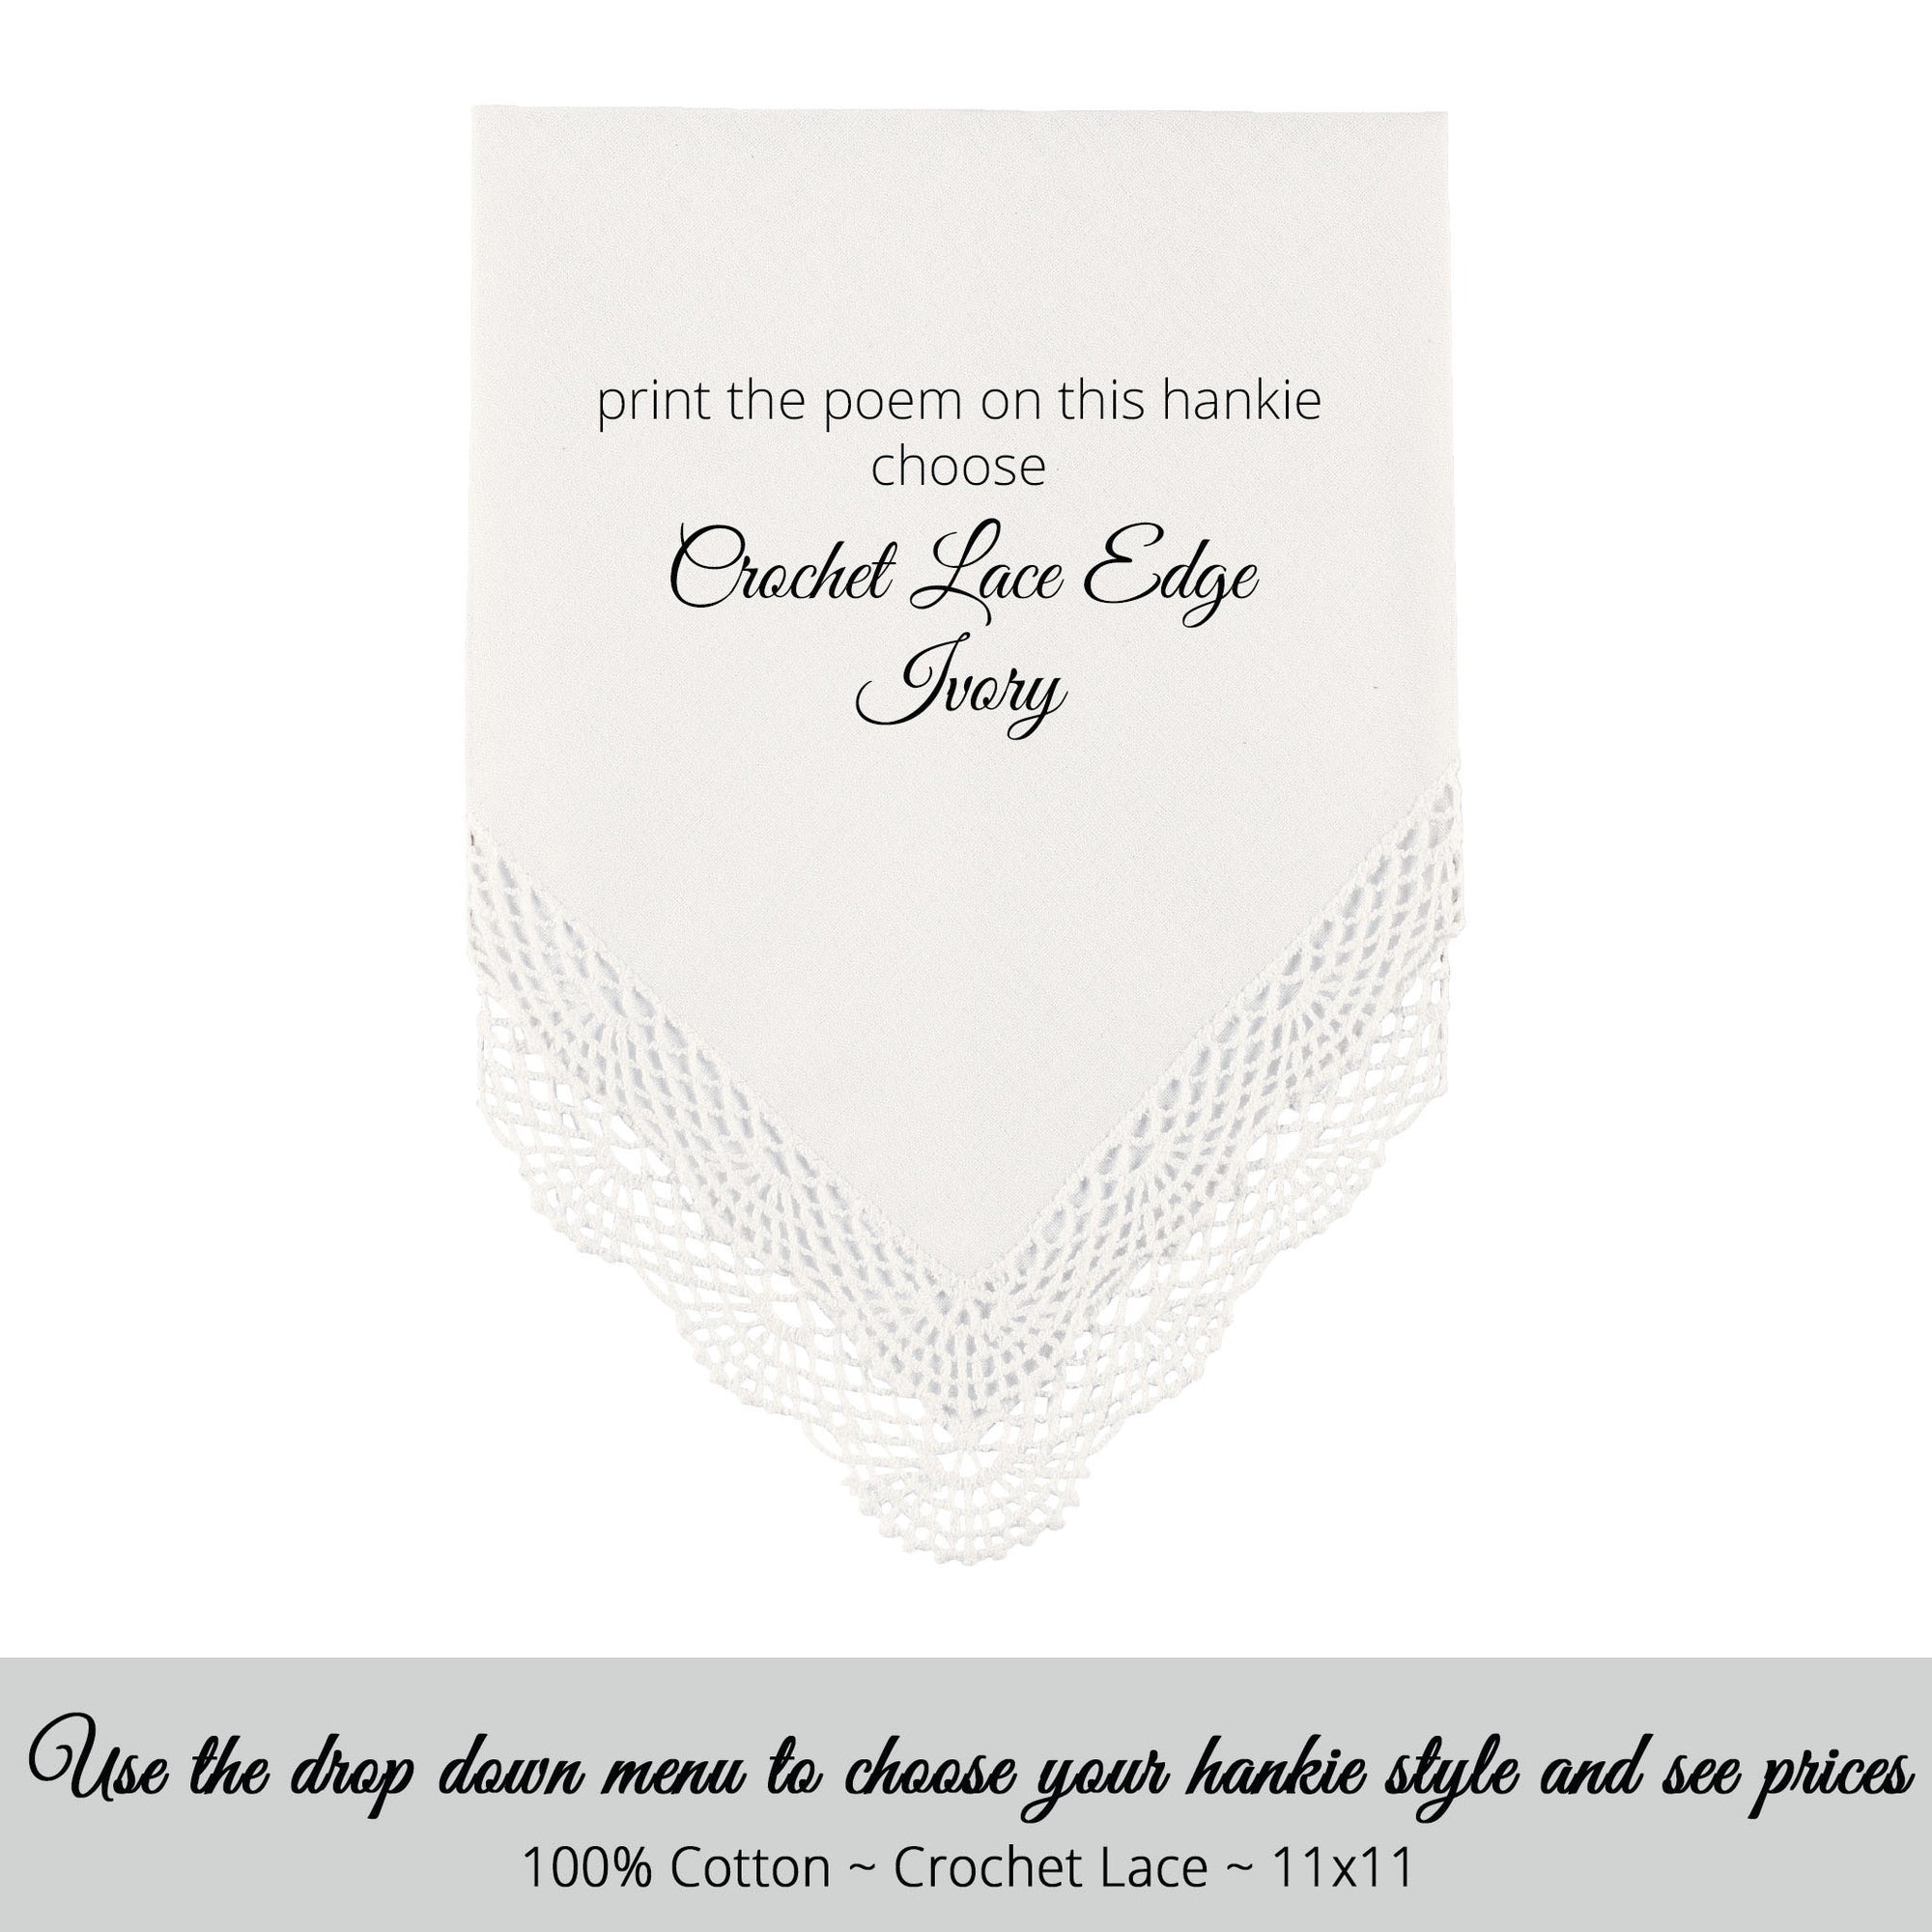 Wedding handkerchief ivory with crochet lace edge for the parents of the bride